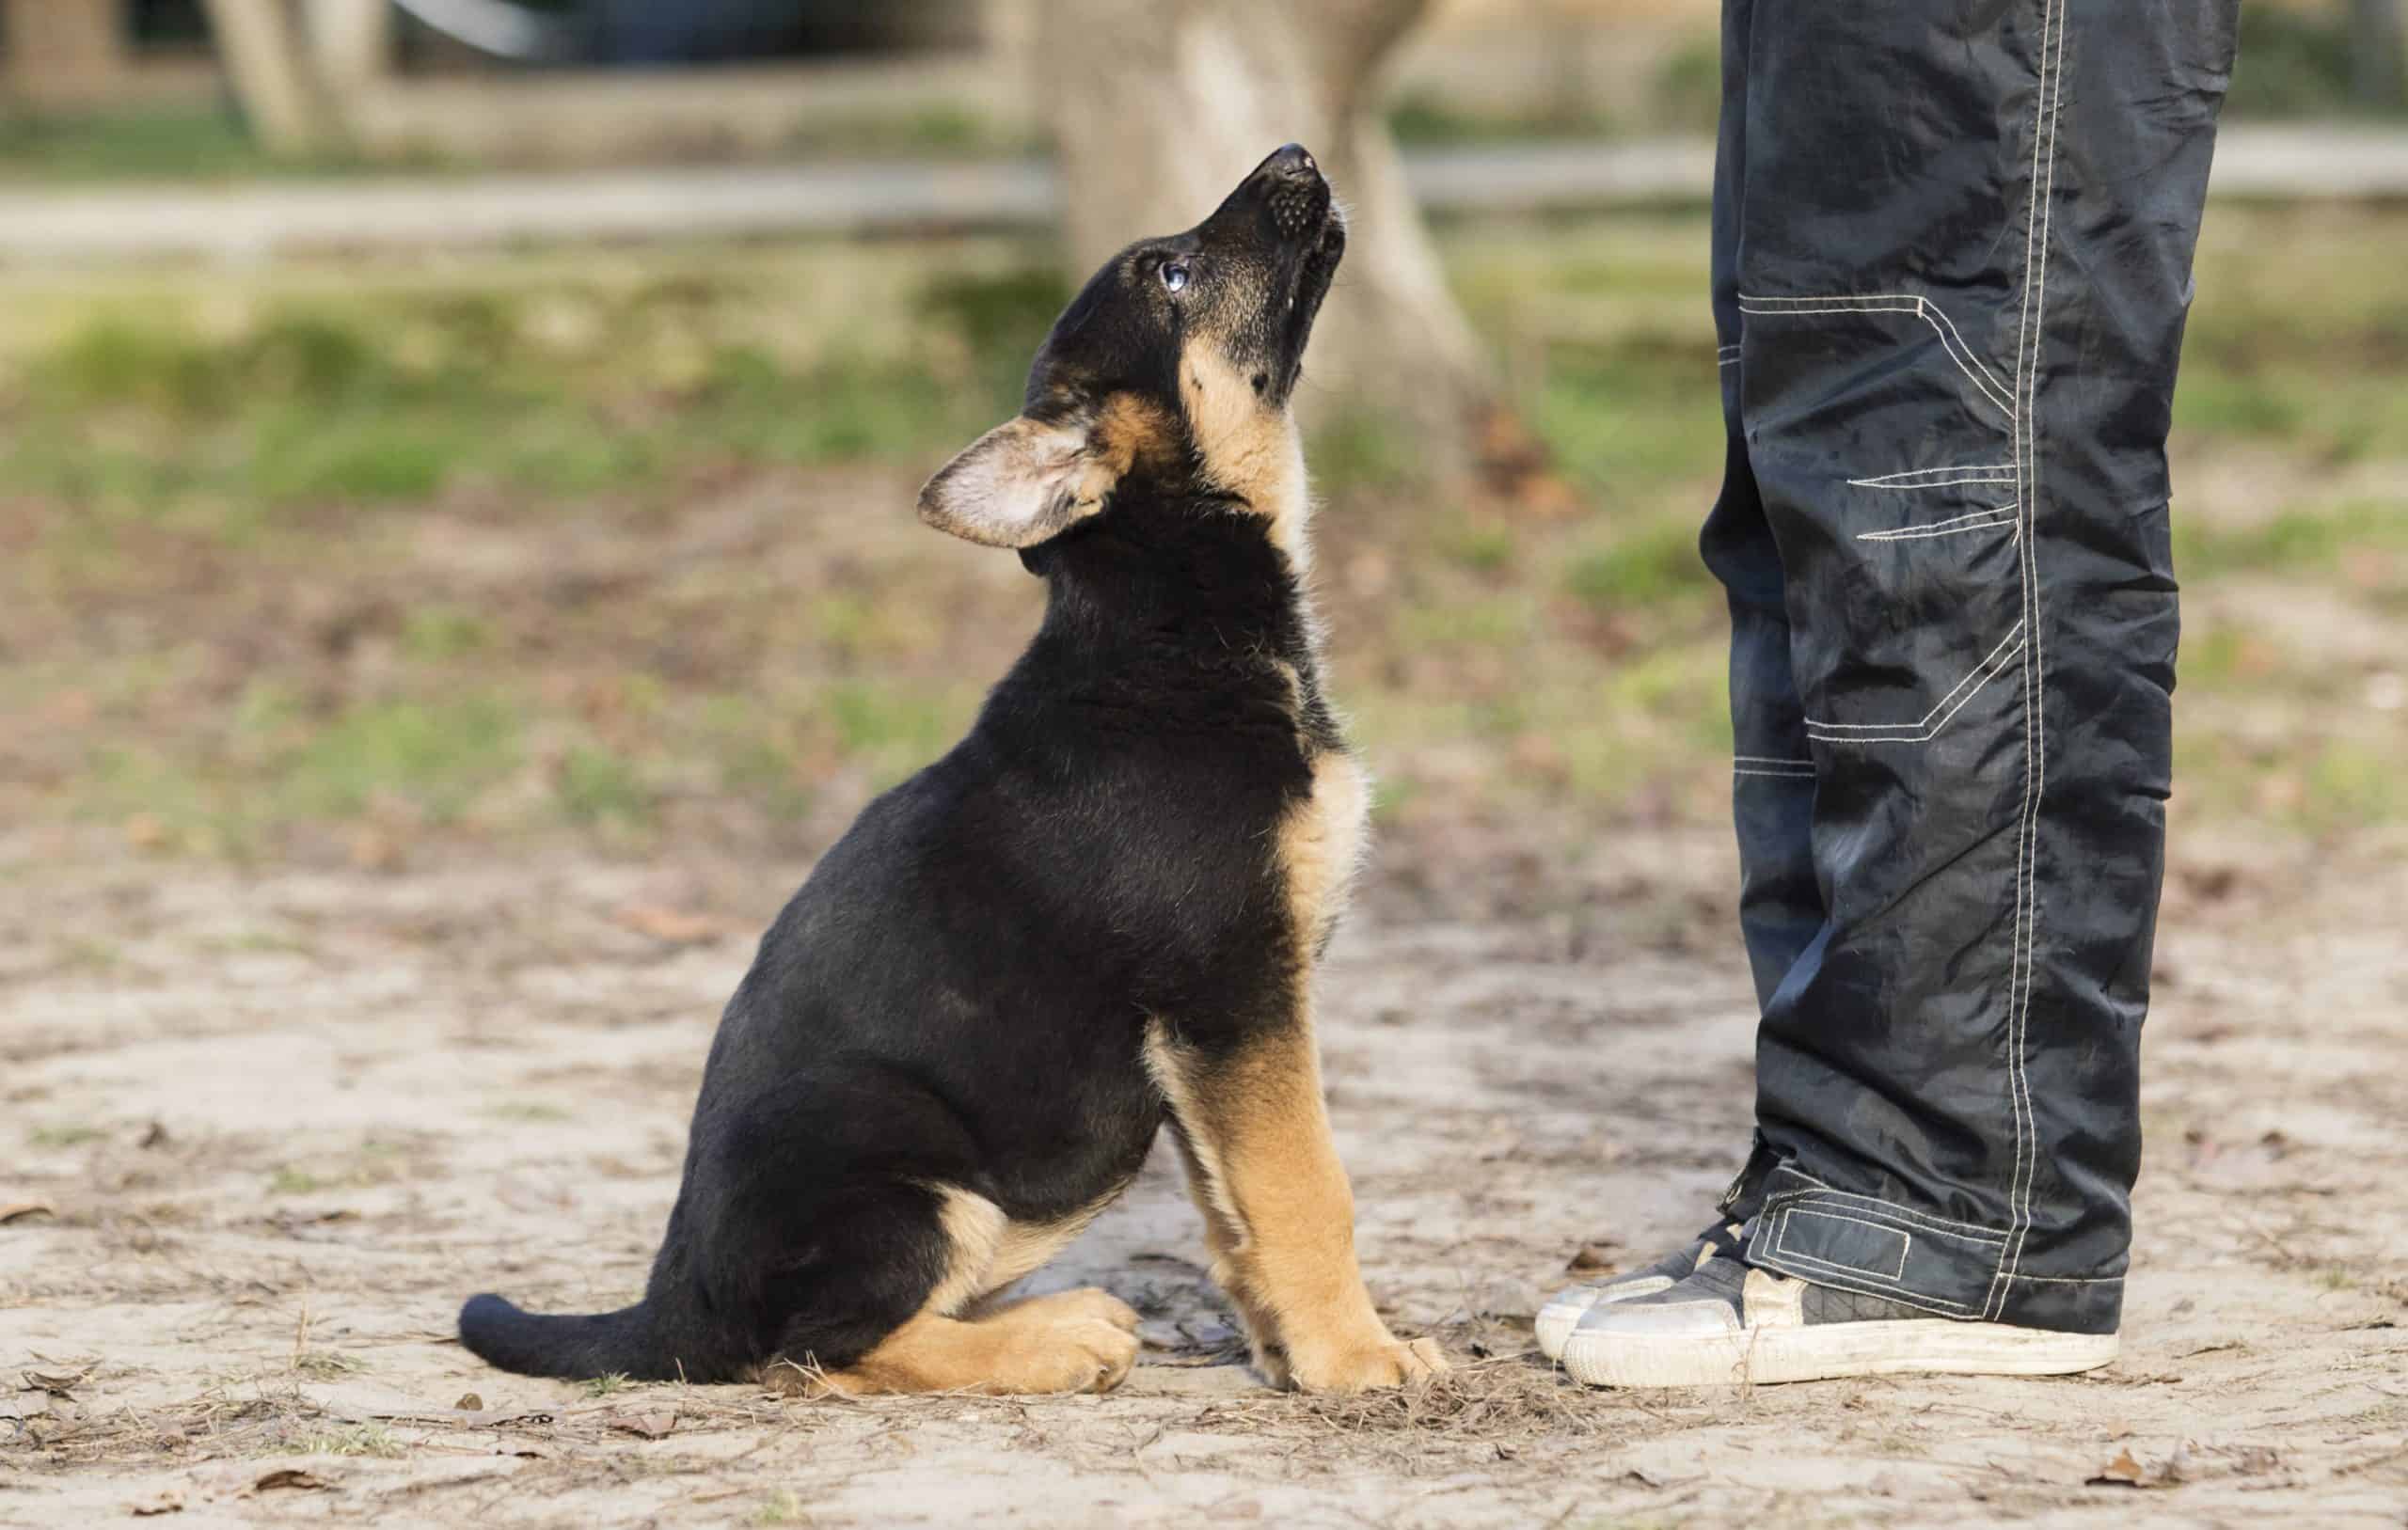 German shepherd puppy training. To train your dog to be well behaved, start with five key cues to teach your puppy: come, sit, stay, wait, and watch.